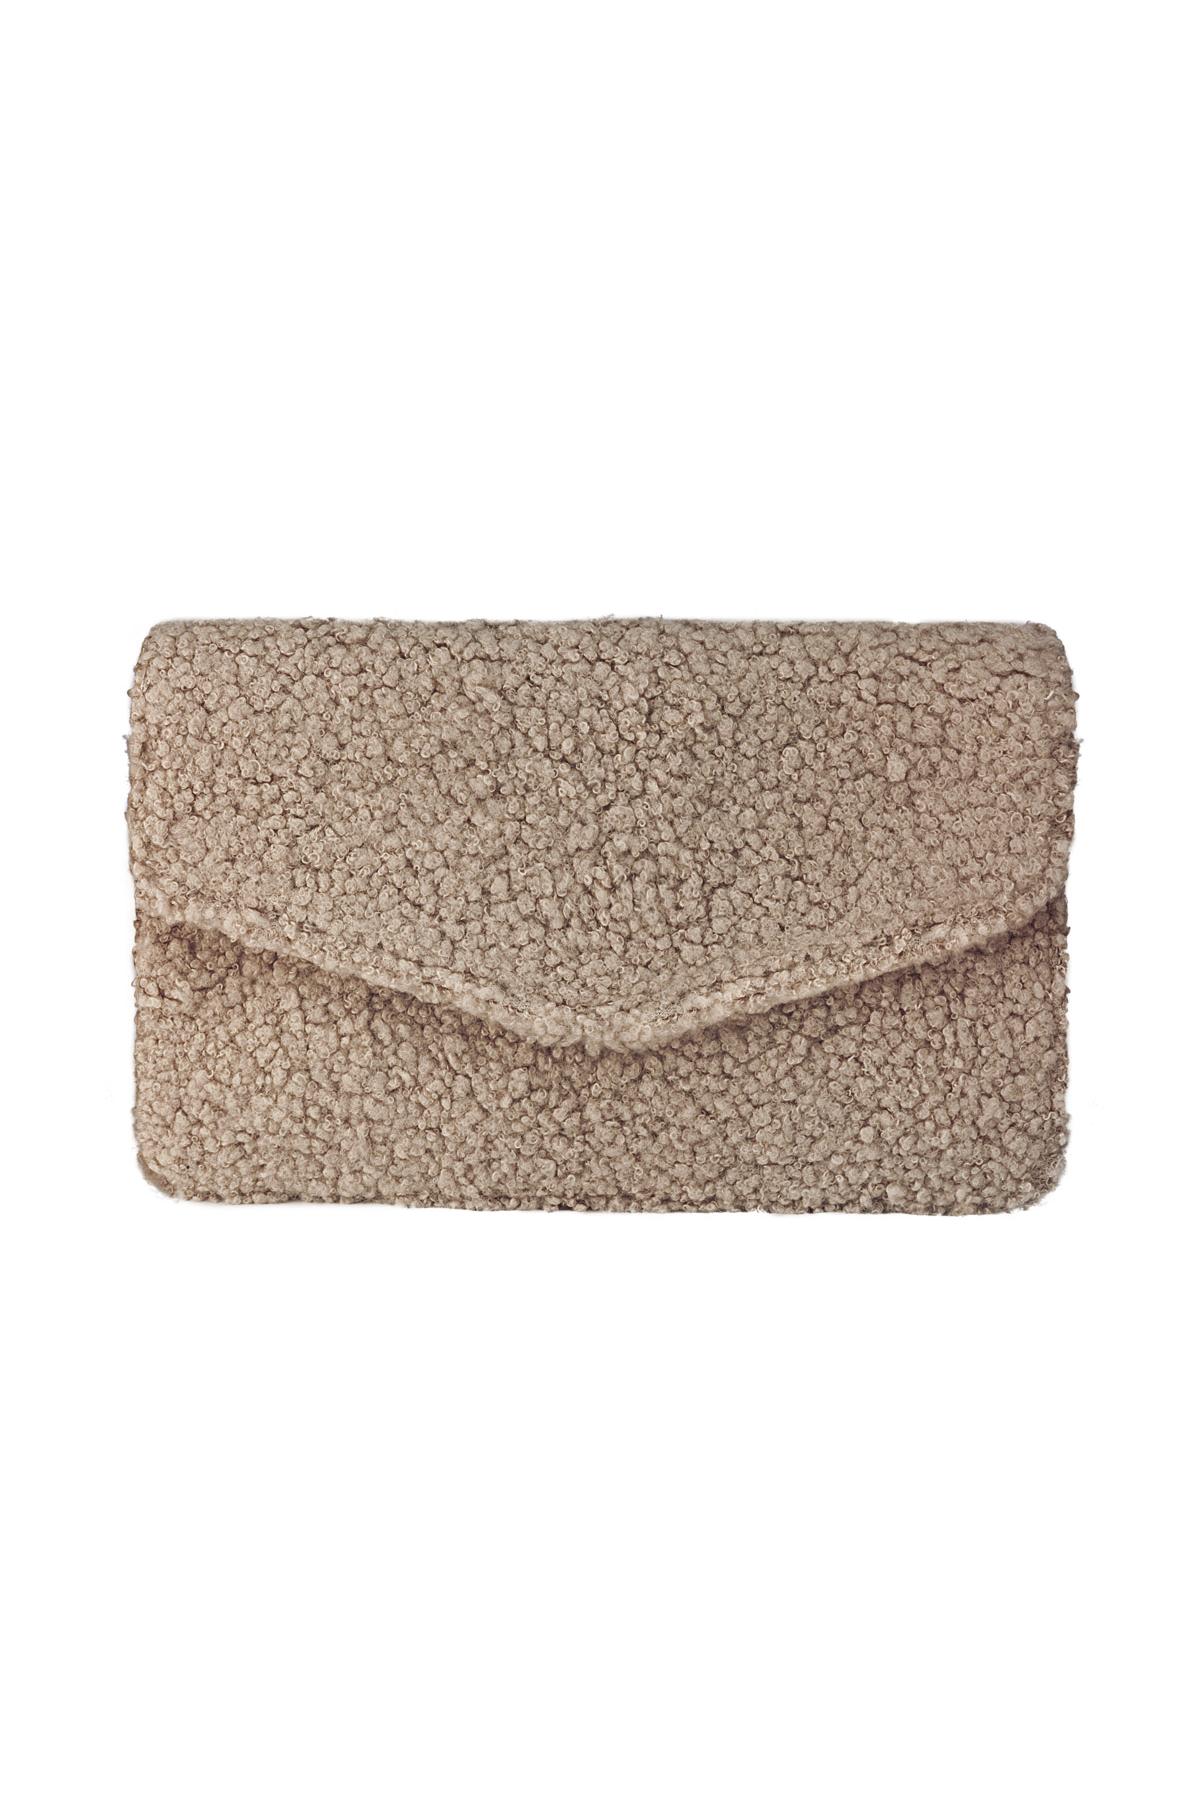 Handtasche Teddy Basic Taupe Polyester